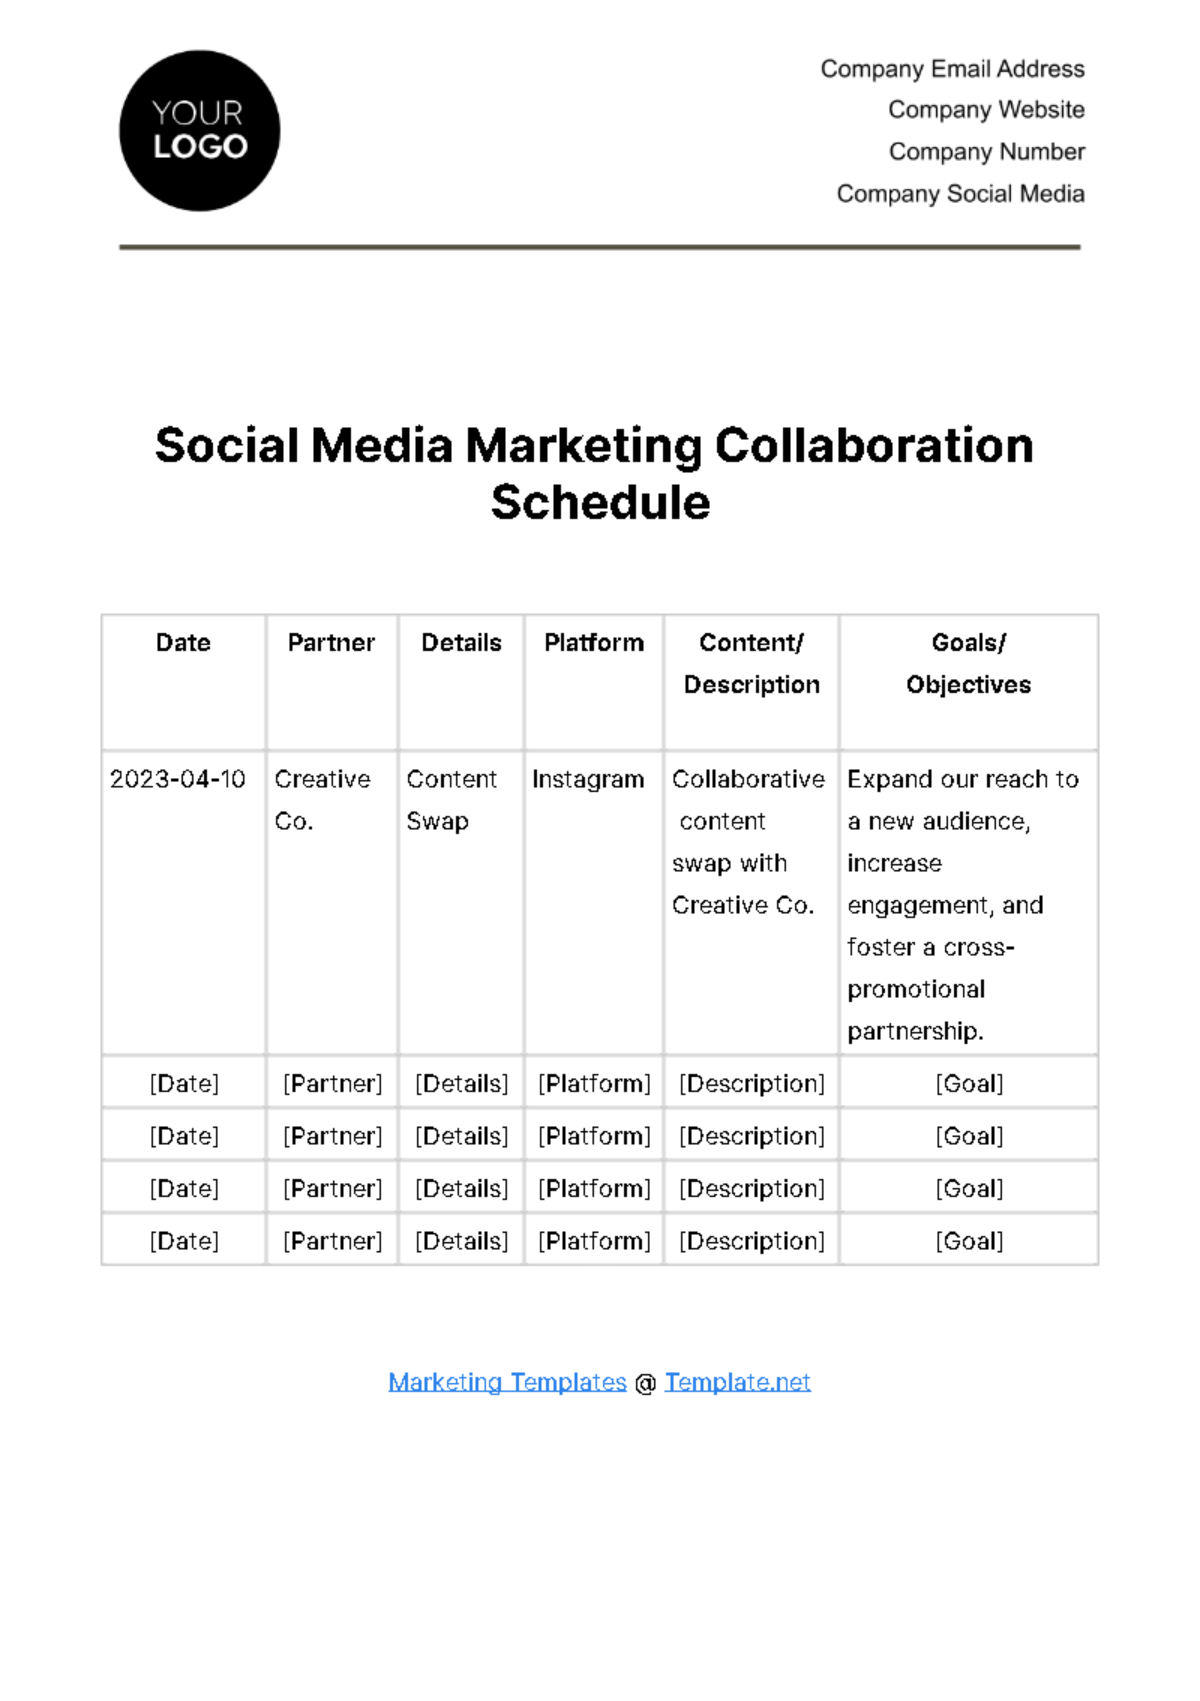 Social Media Marketing Collaboration Schedule Template